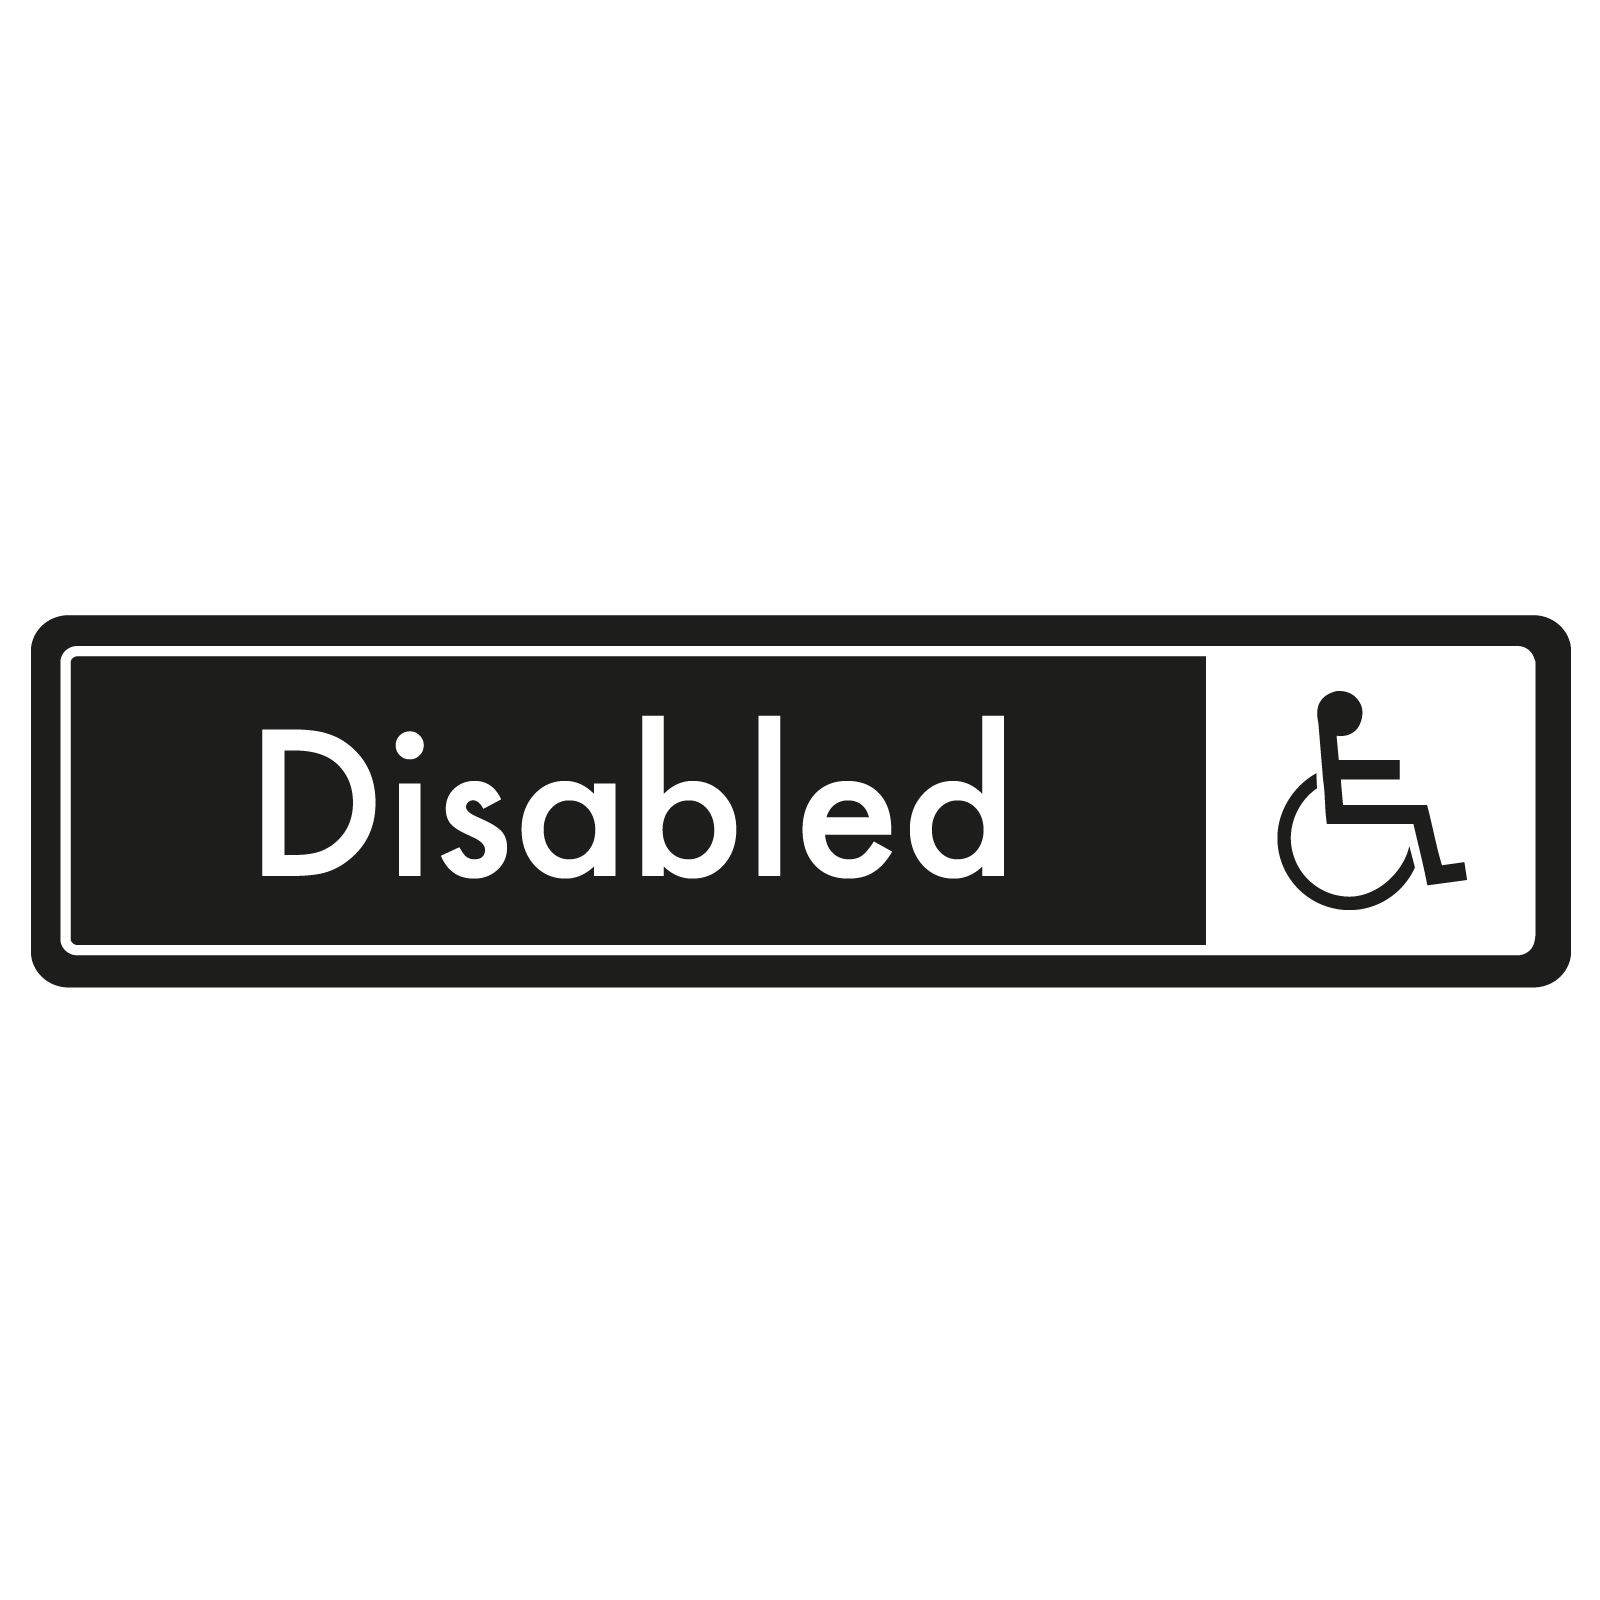 Disabled Door Sign - White on Black